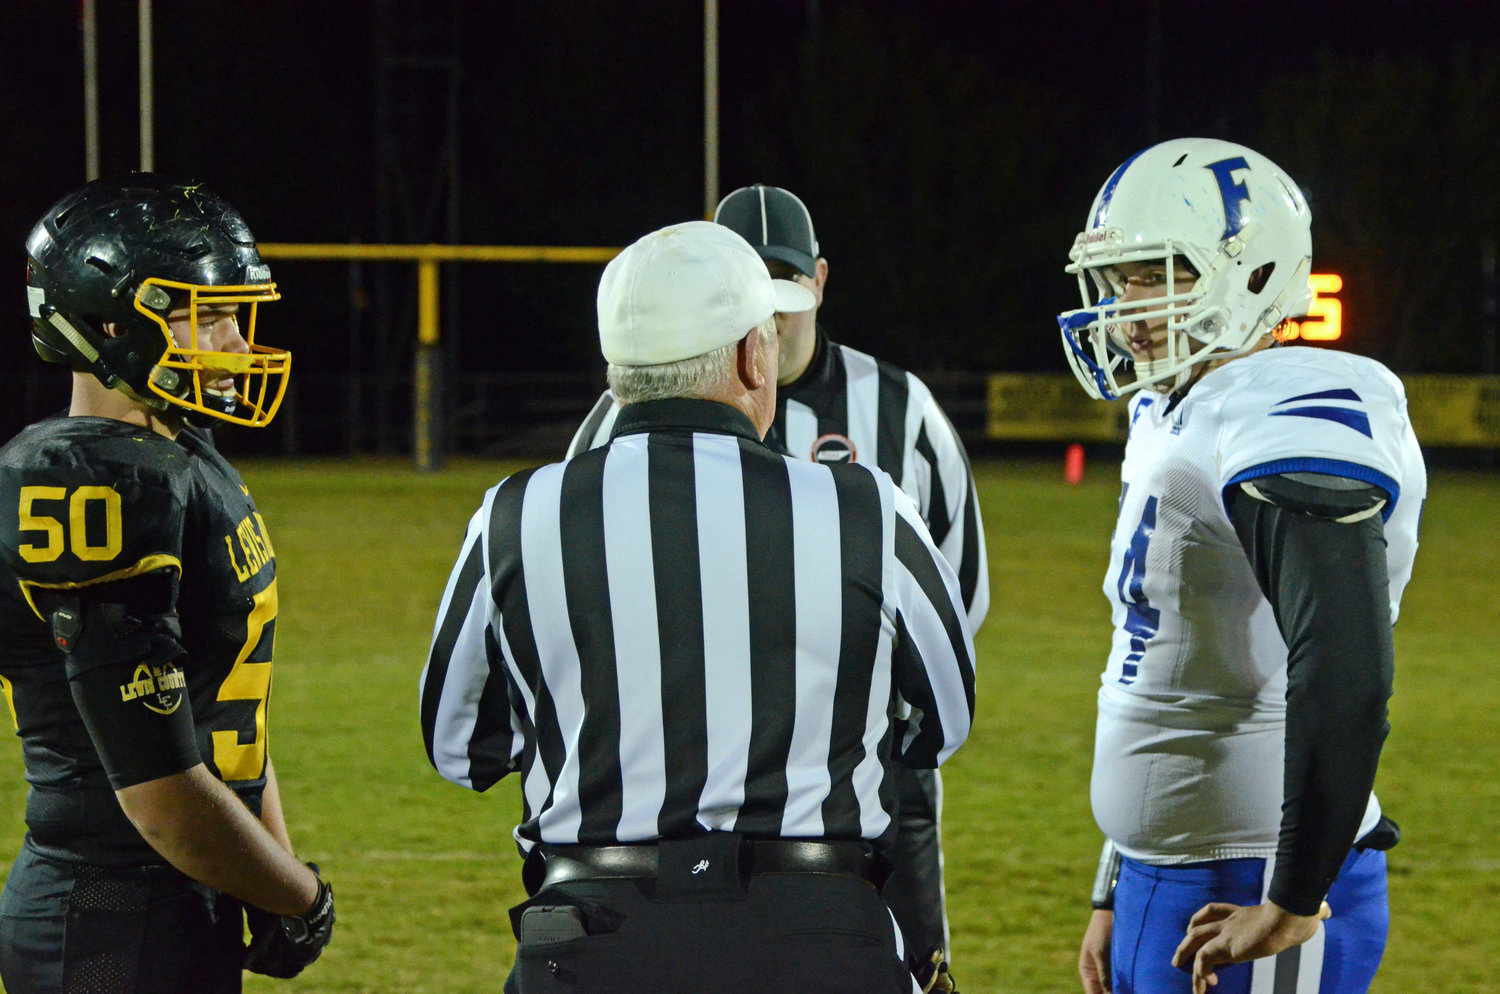 Rocket senior lineman Bridger Blue (74) and Lewis County senior lineman Ian Carroll (50) meet at midfield for the coin toss with the TSSAA referees.